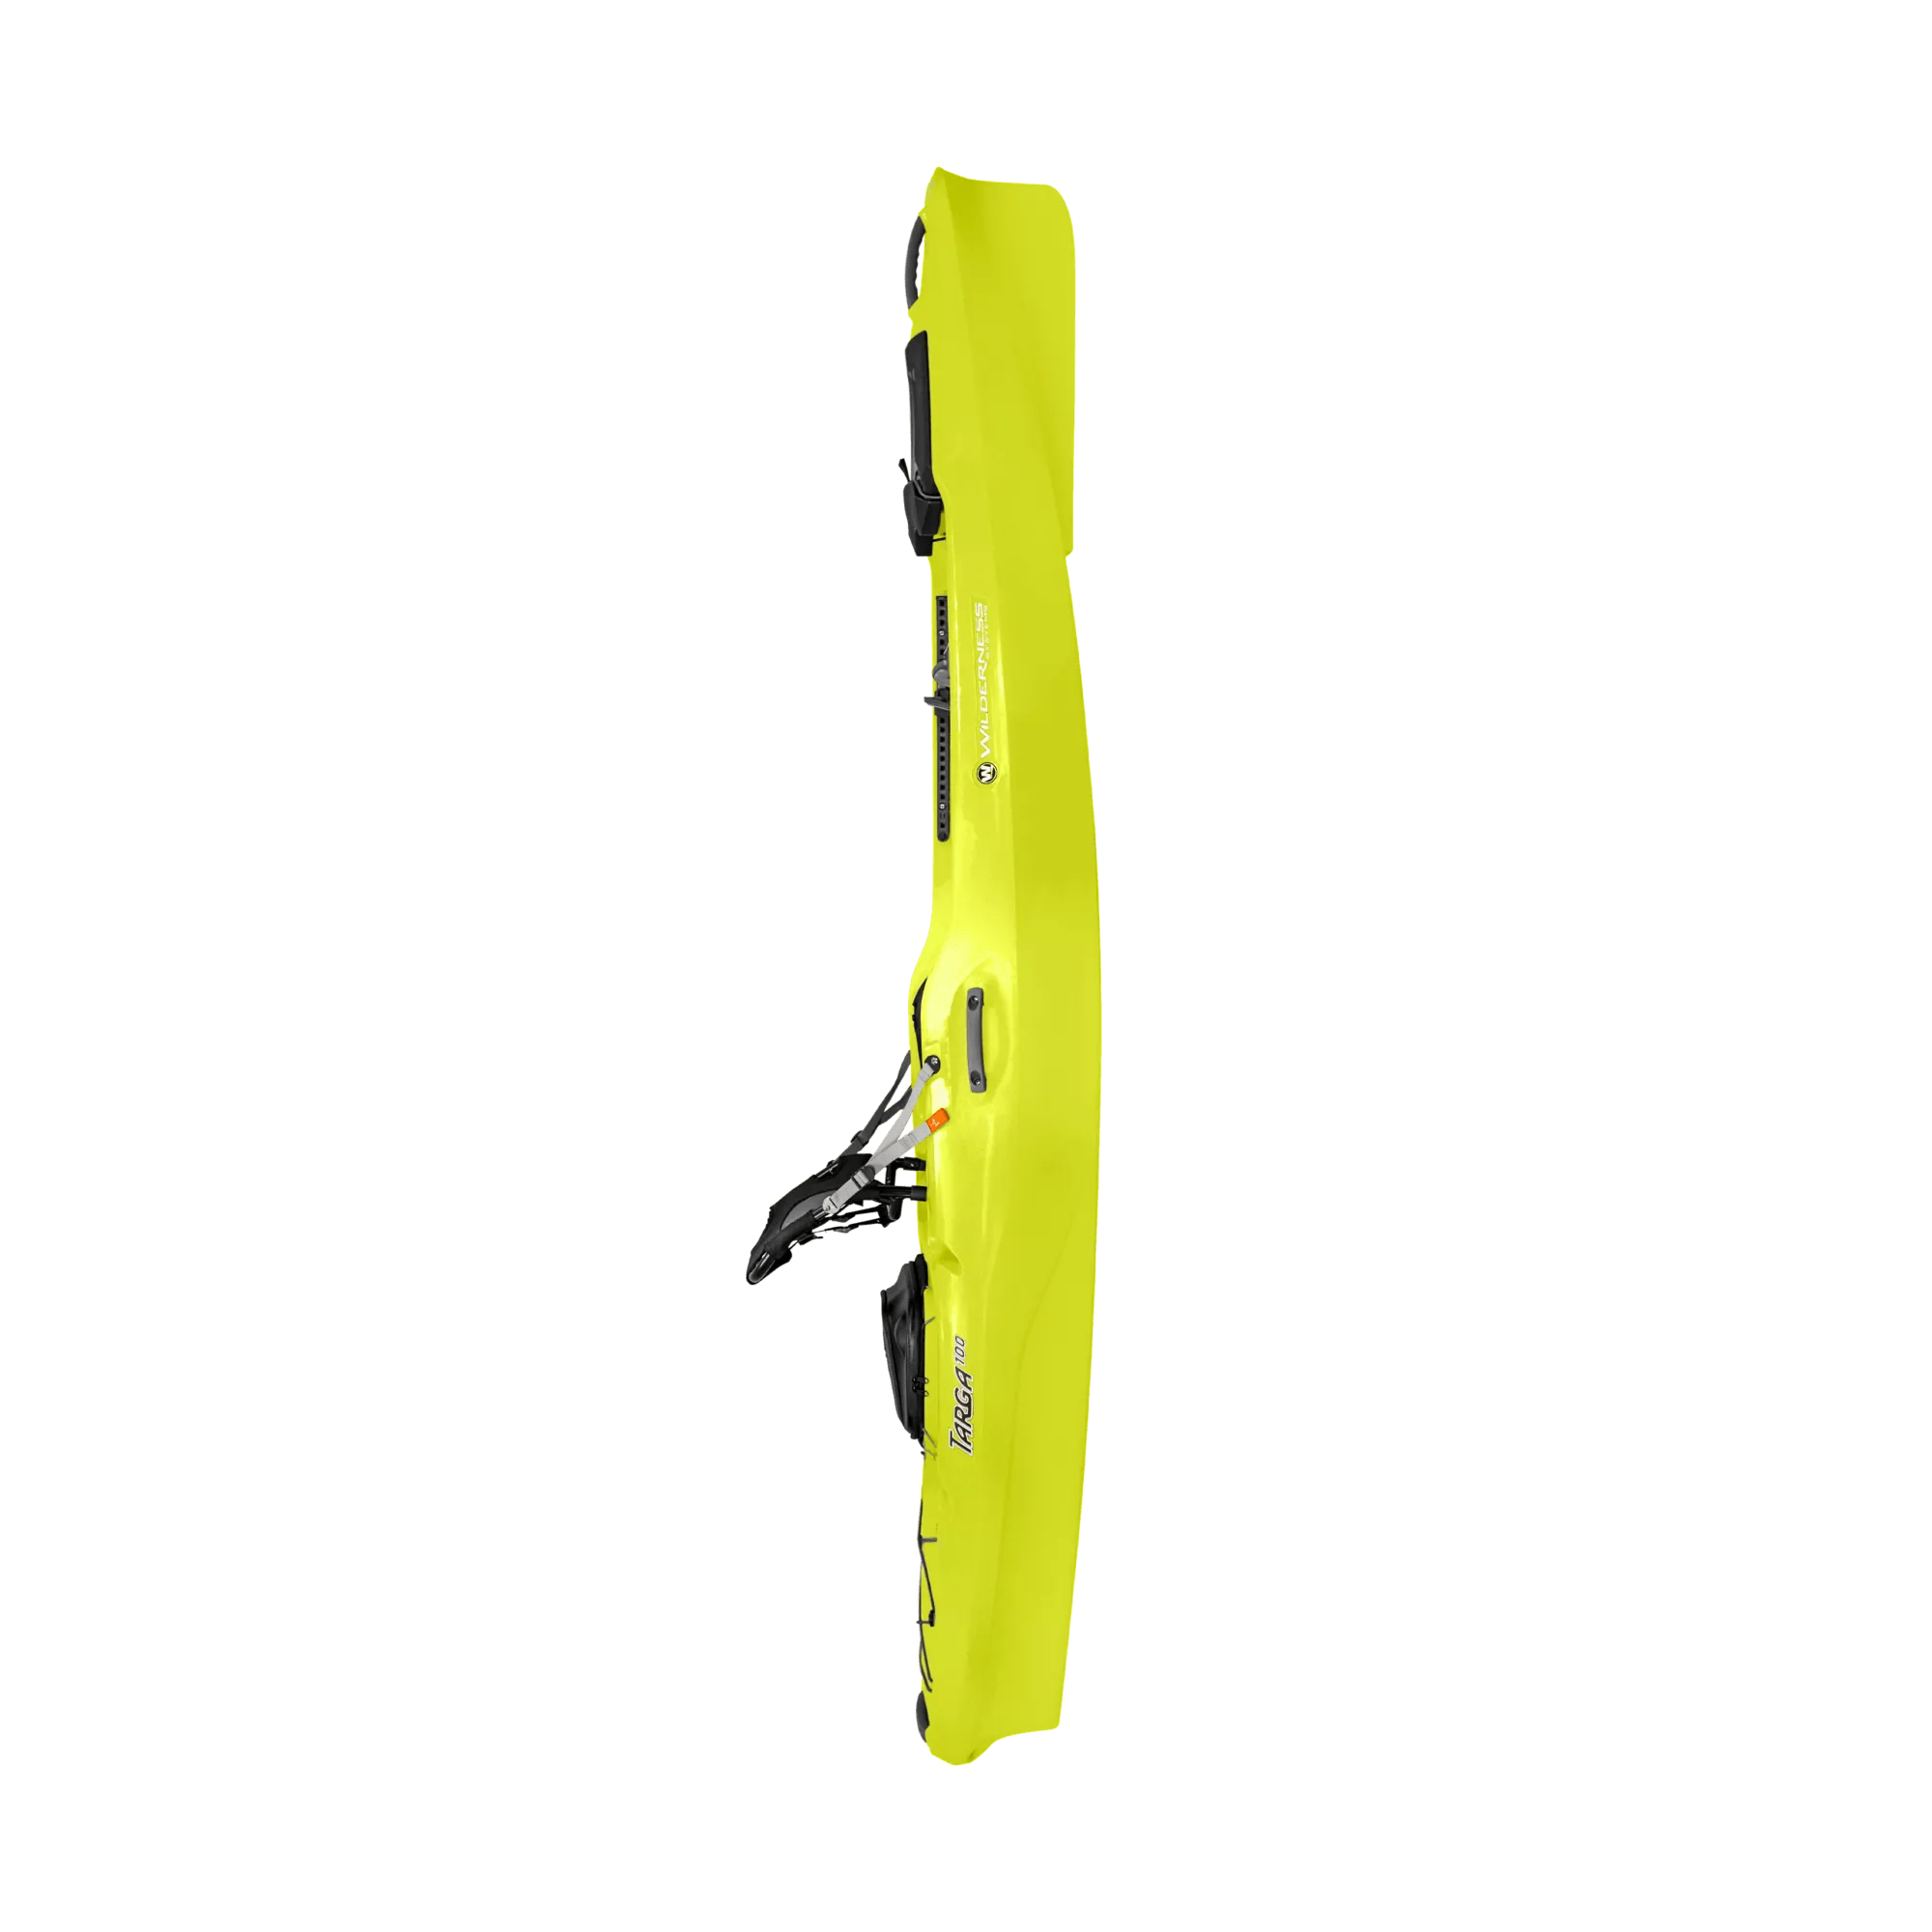 WILDERNESS SYSTEMS - Targa 100 Recreational Kayak - Discontinued color/model - Yellow - 9751121180 - SIDE